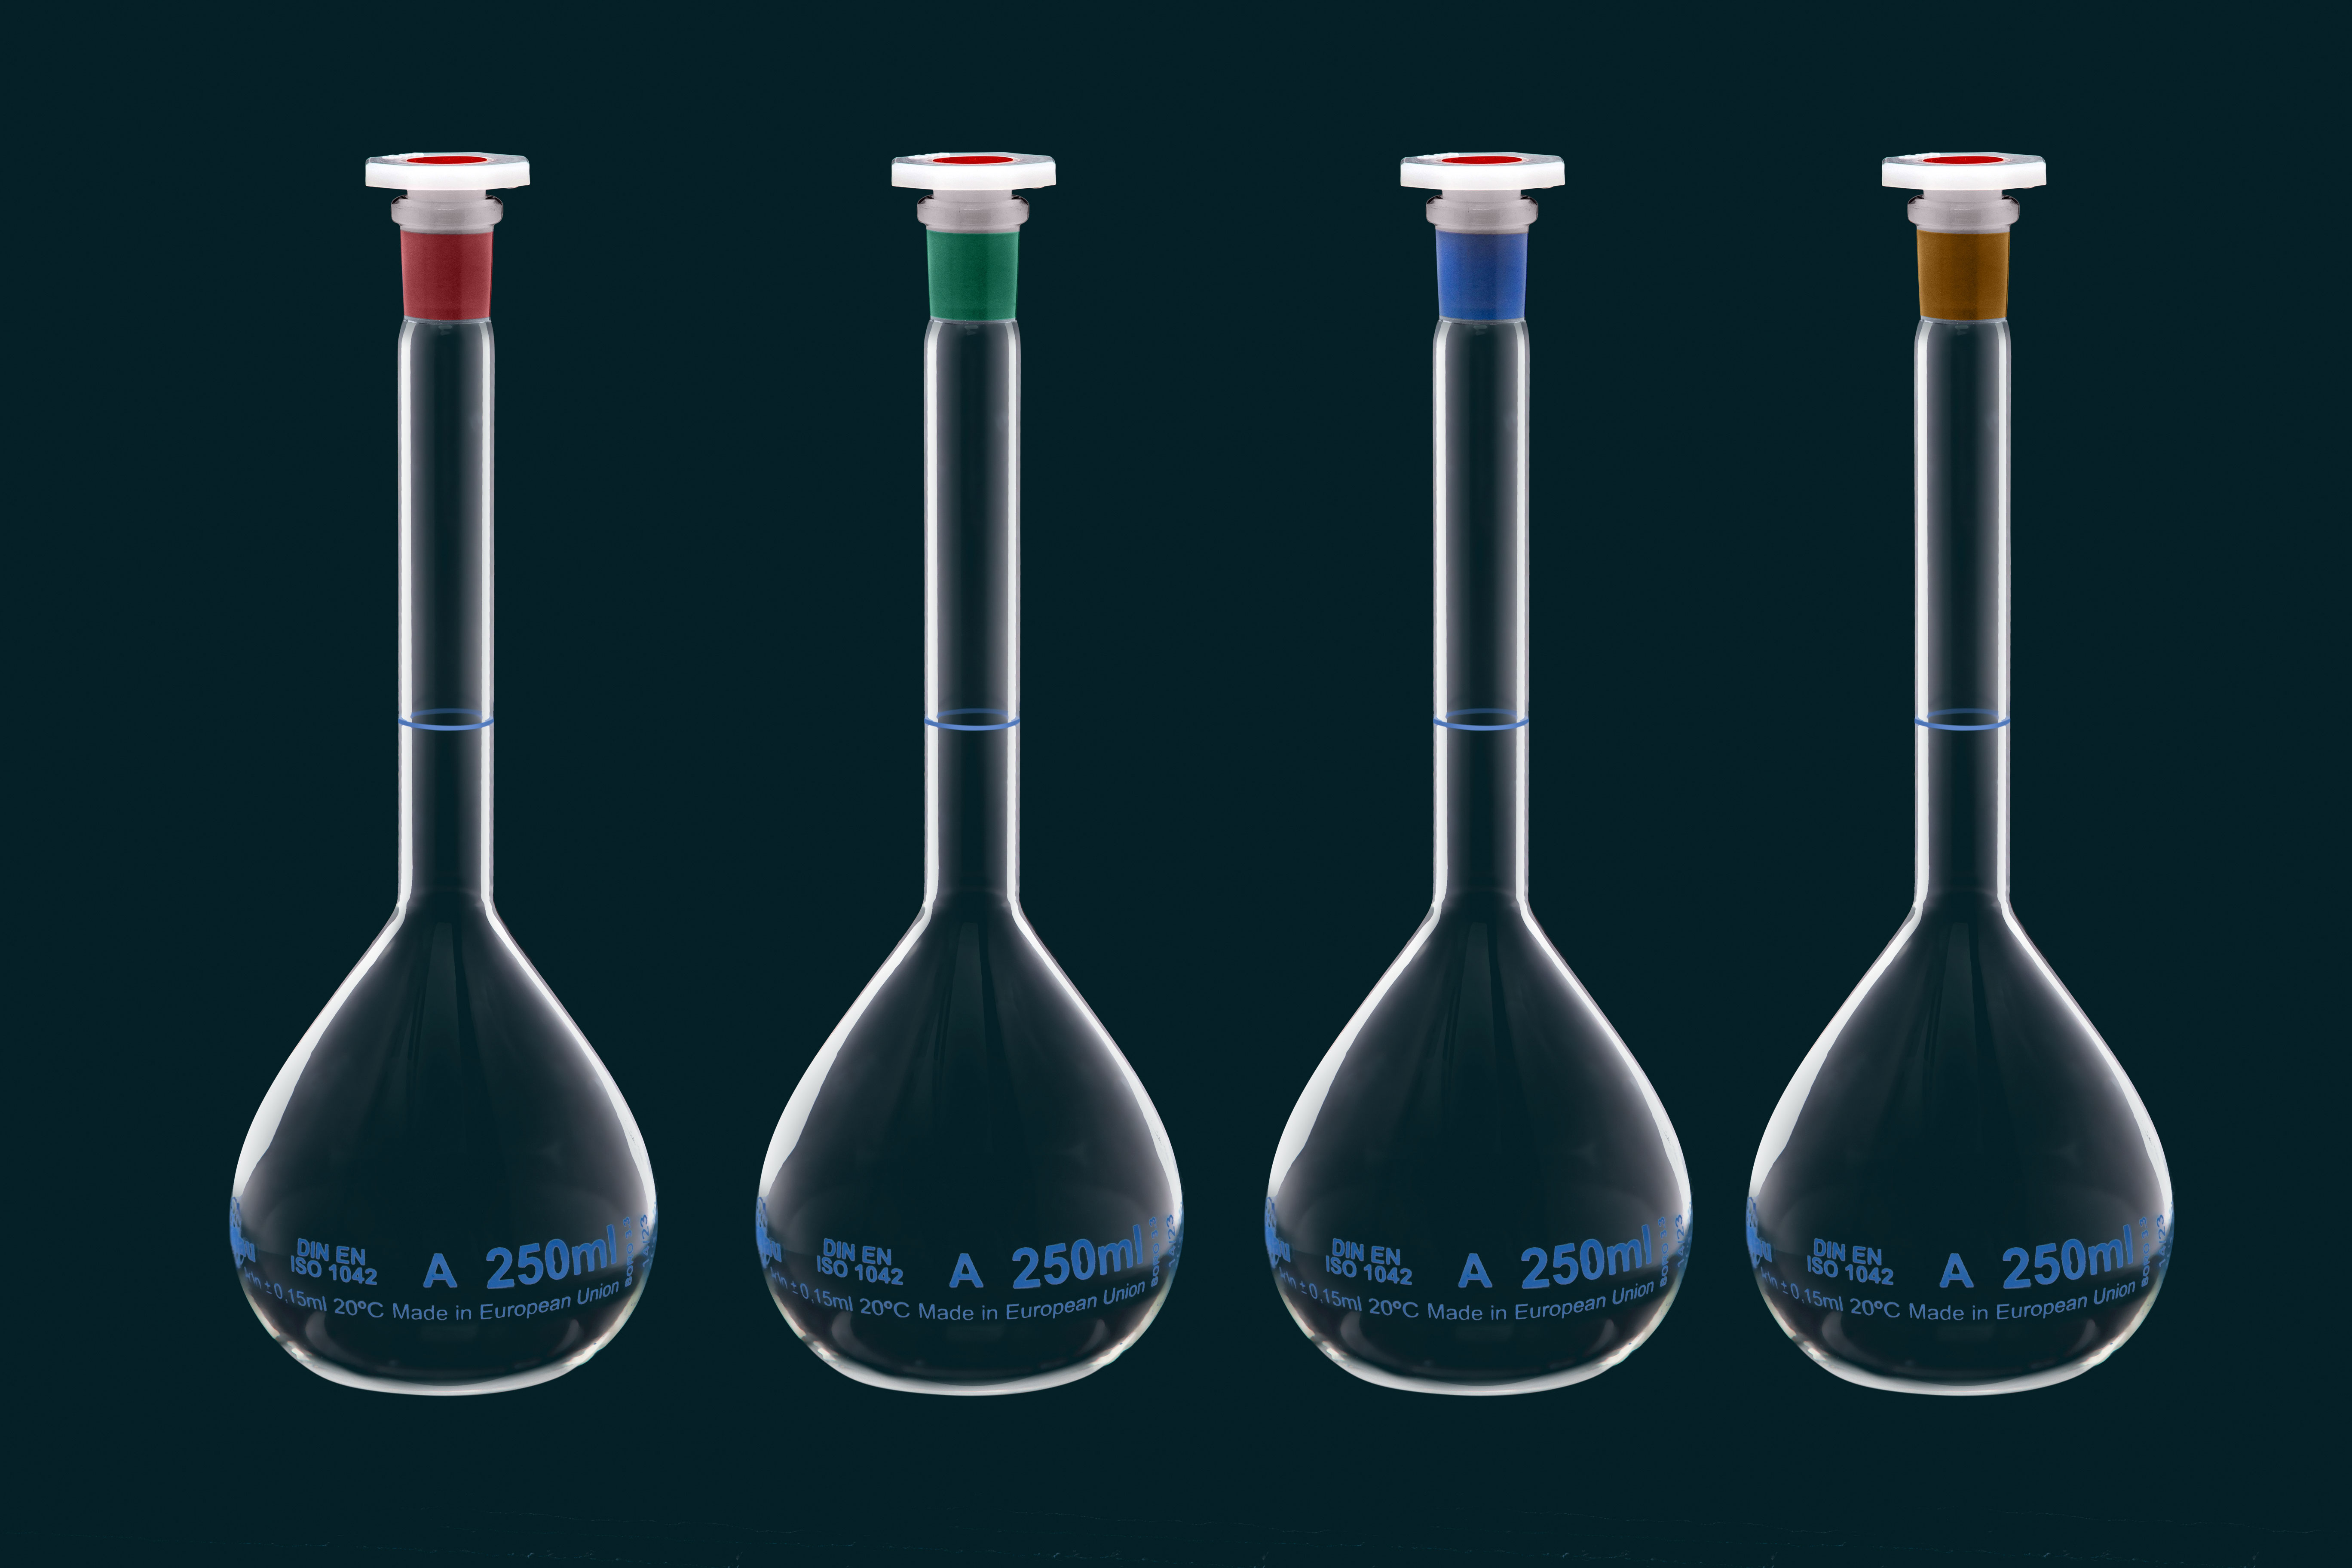 Volumetric flask with red neck, Class A, 250 ml, with PE stopper, lot number and certificate of conformity